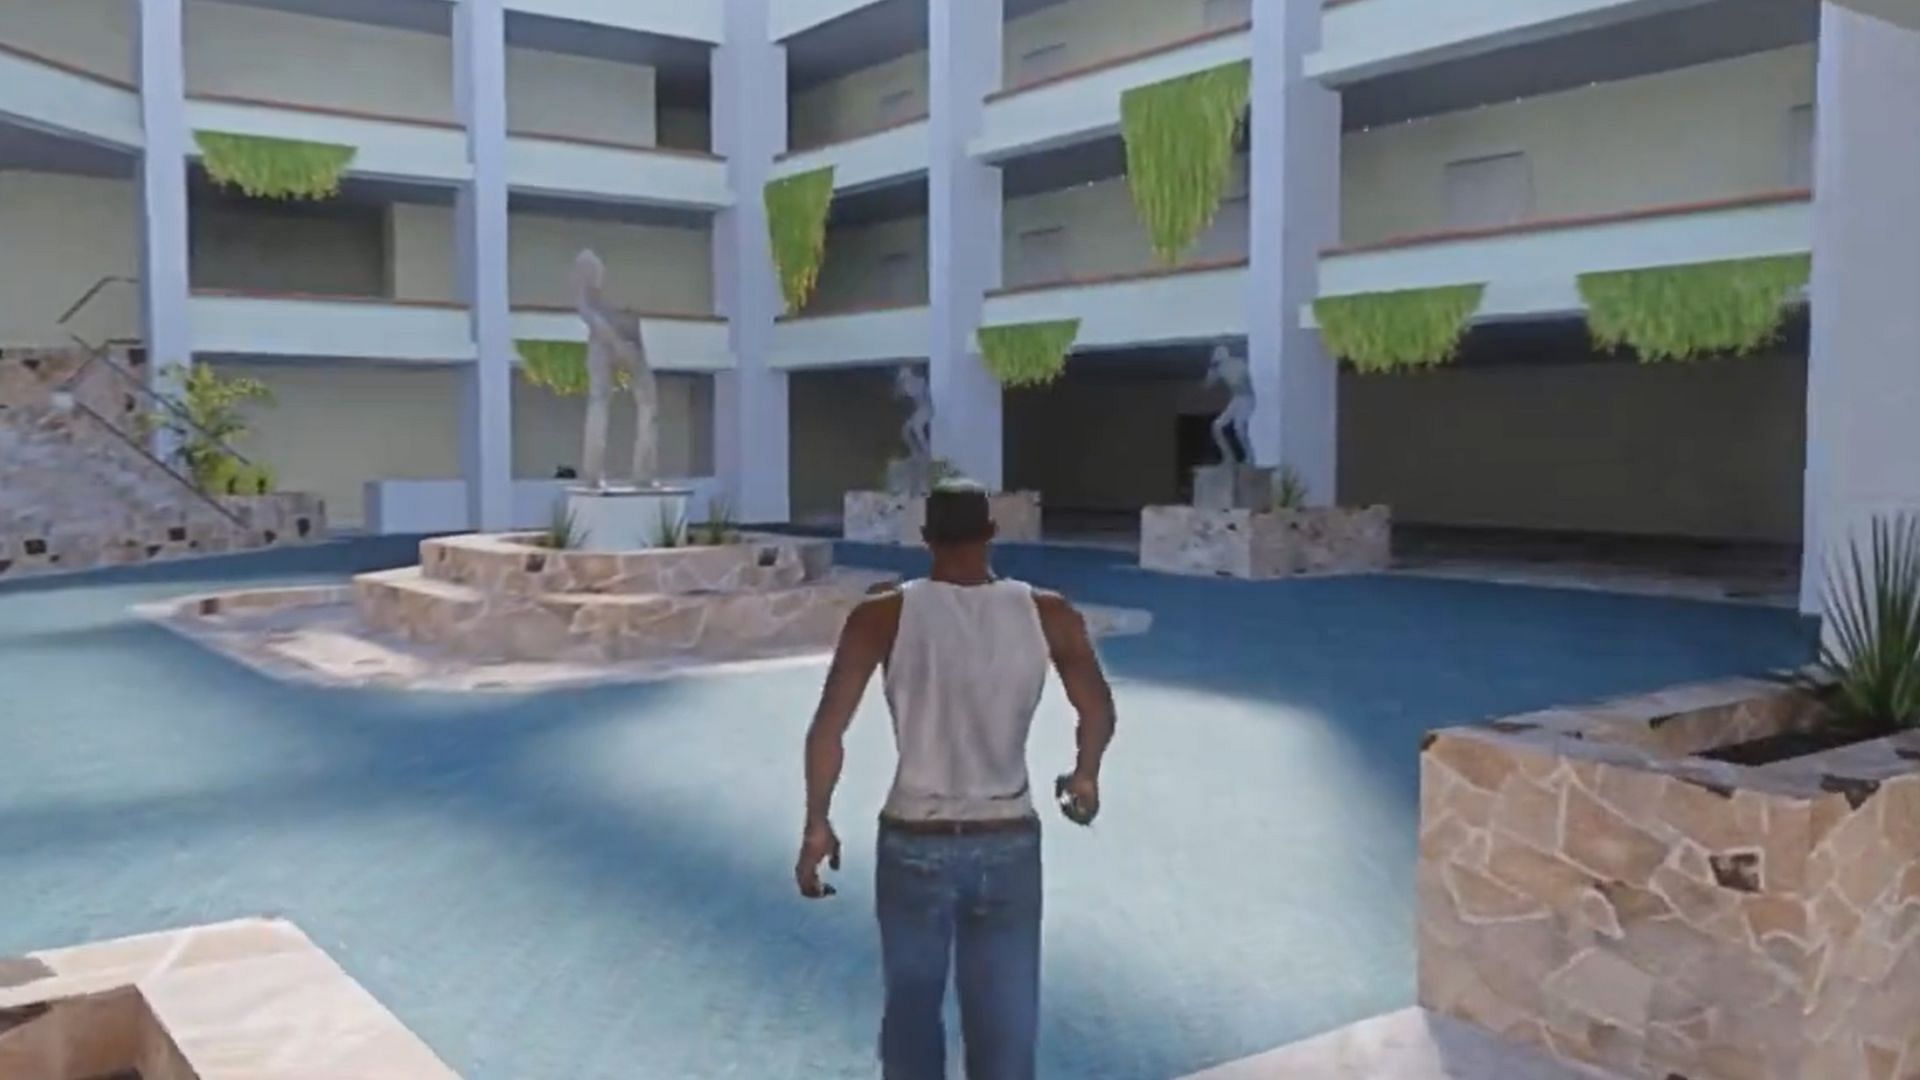 A screenshot from the modded San Andreas gameplay (Image via YouTube/Immersive Street || Rockstar Games)